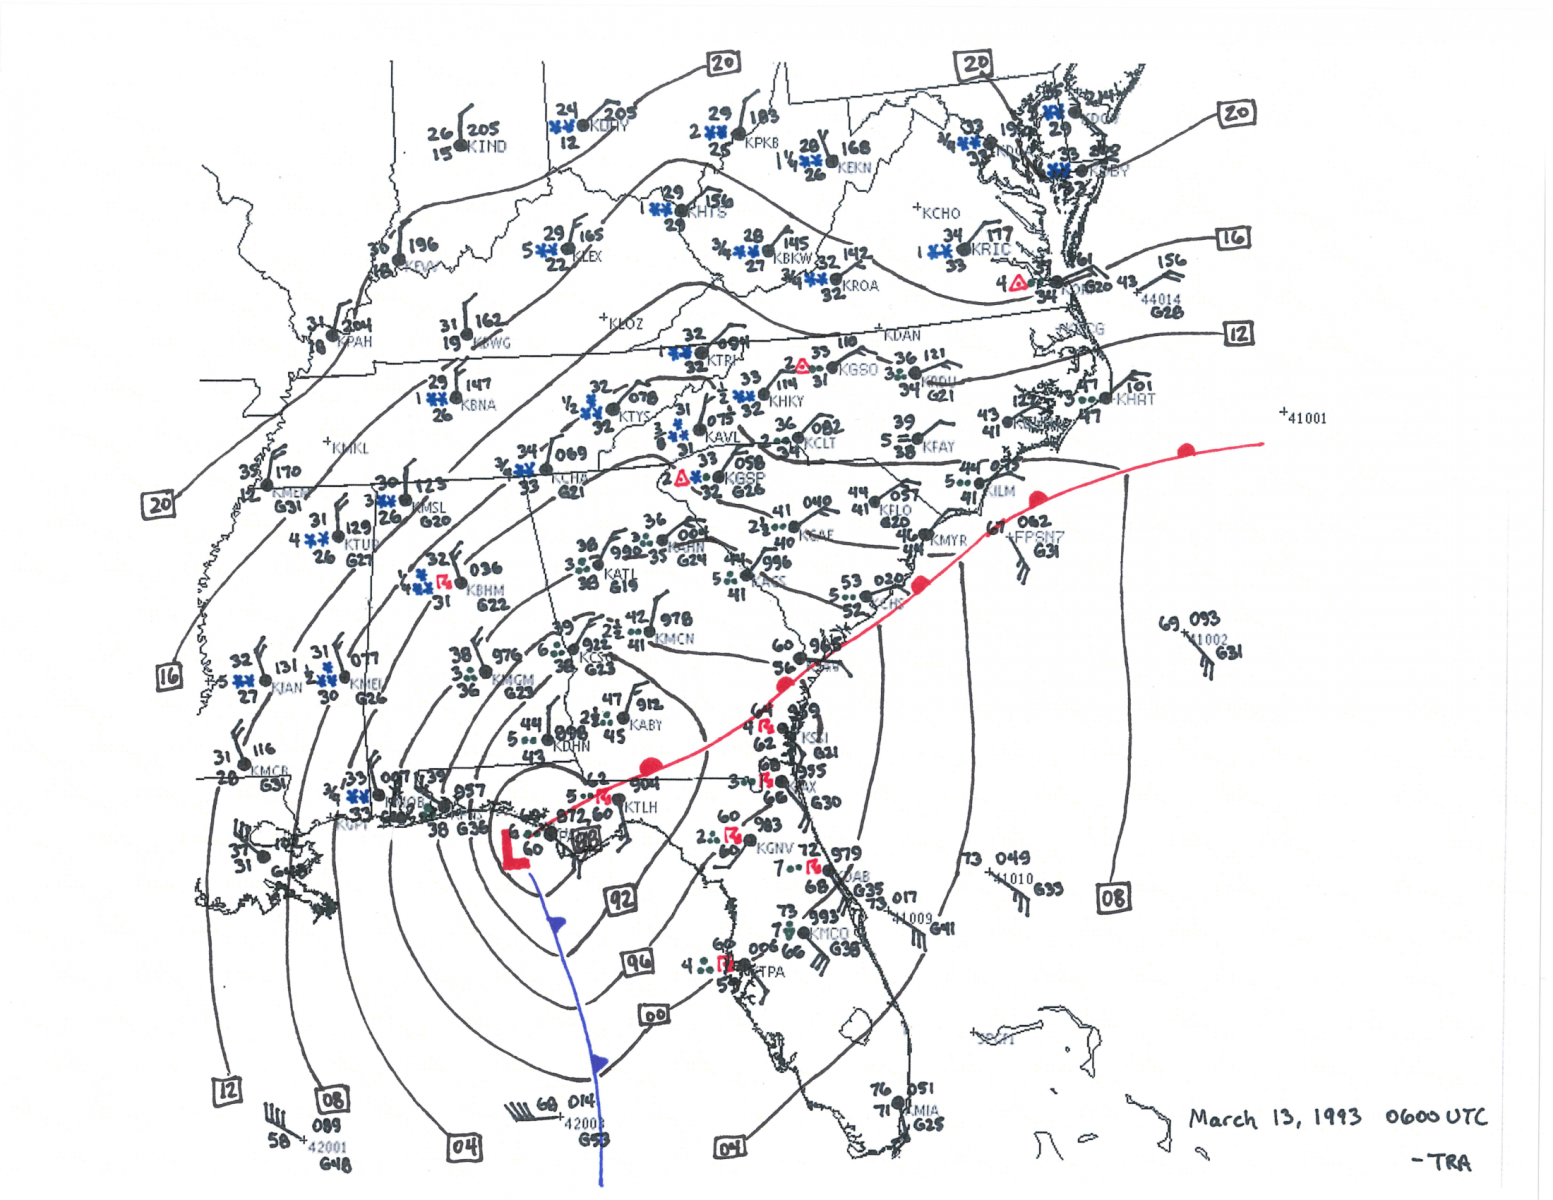 1993 Storm of the Century Surface Analysis at 1 AM March 13, 1993